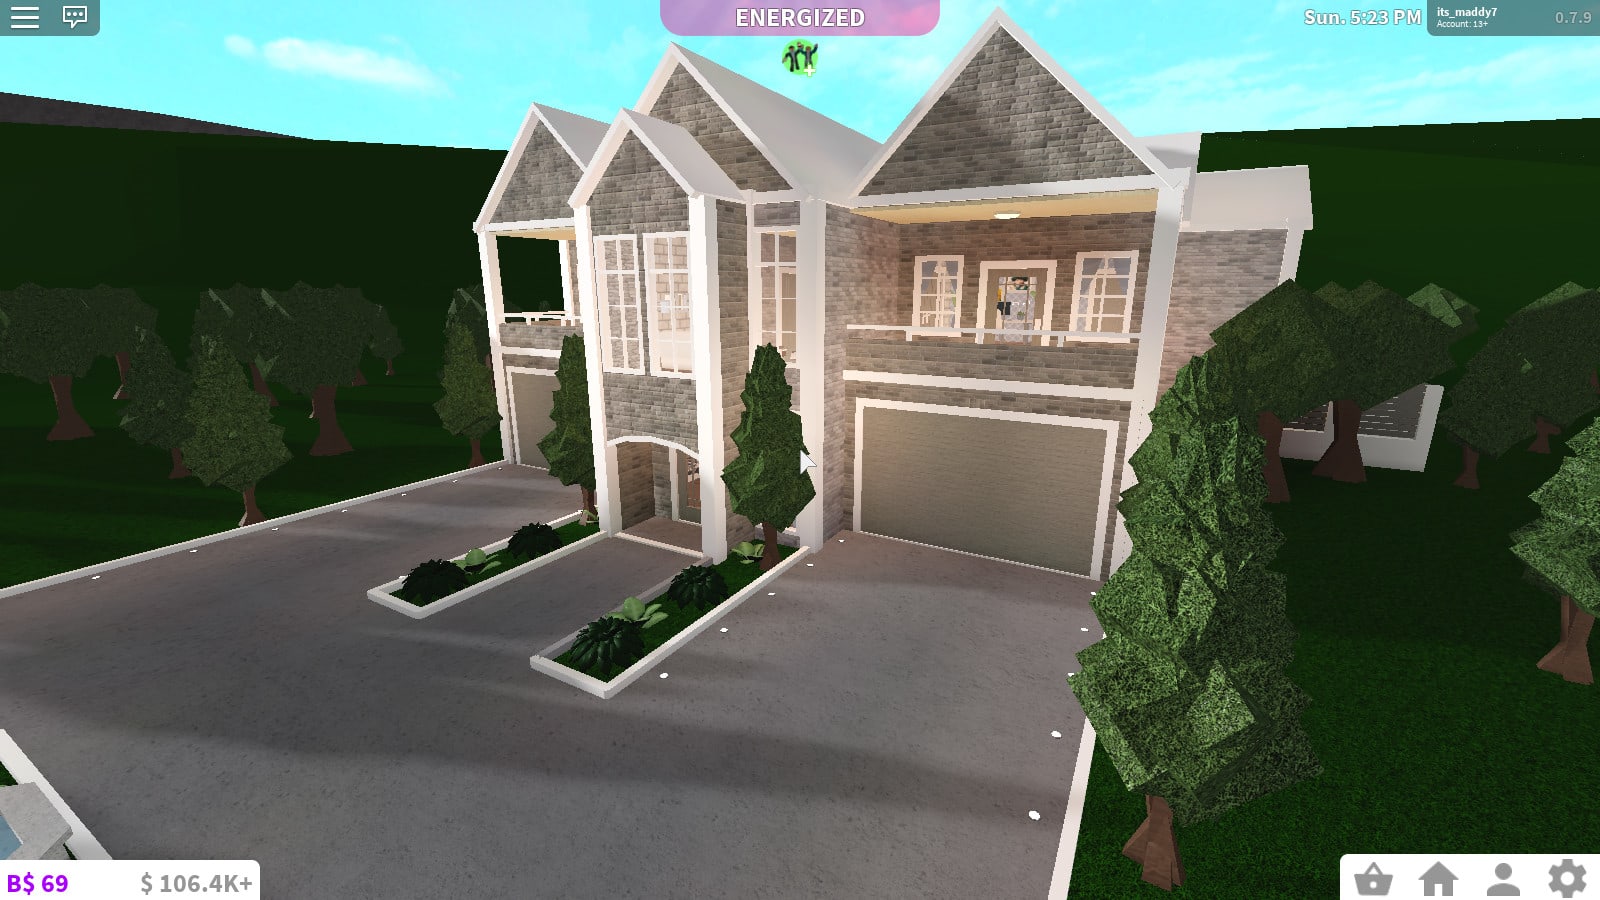 Build You A House In Bloxburg By Its Maddy7